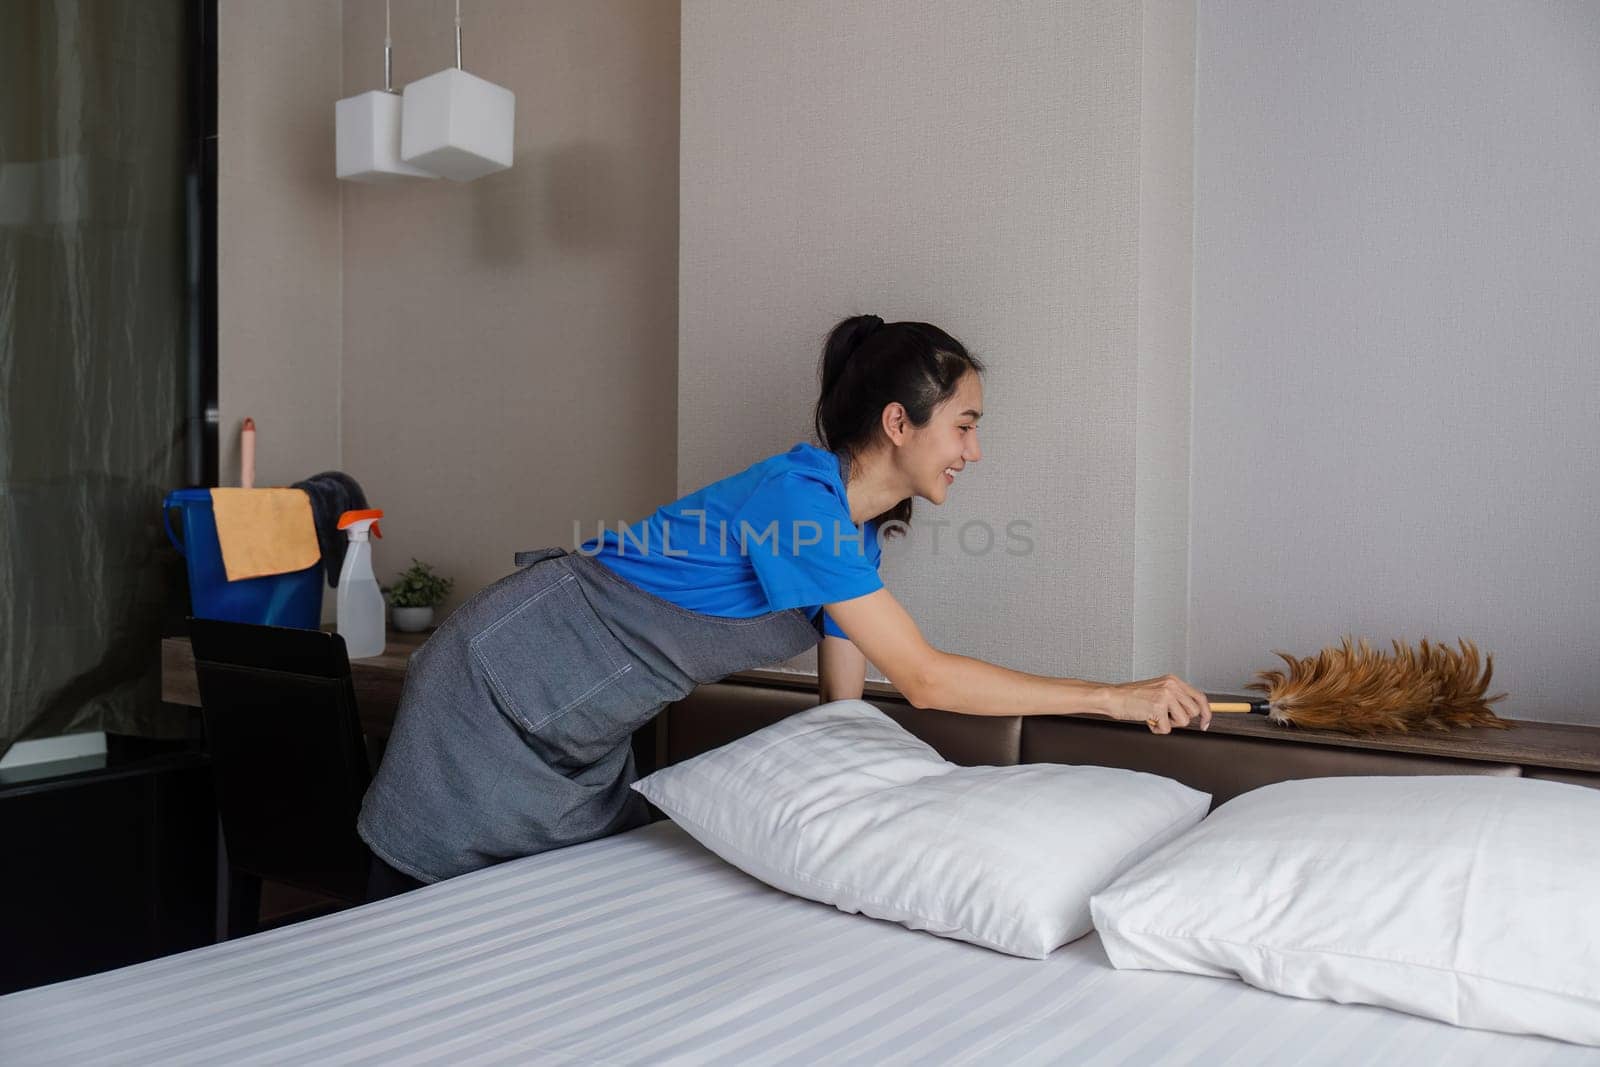 cleaning service woman worker clean bedroom at hotel. housekeeper cleaner feel happy and make bed look neat. housework and housekeeping cleaning service by itchaznong